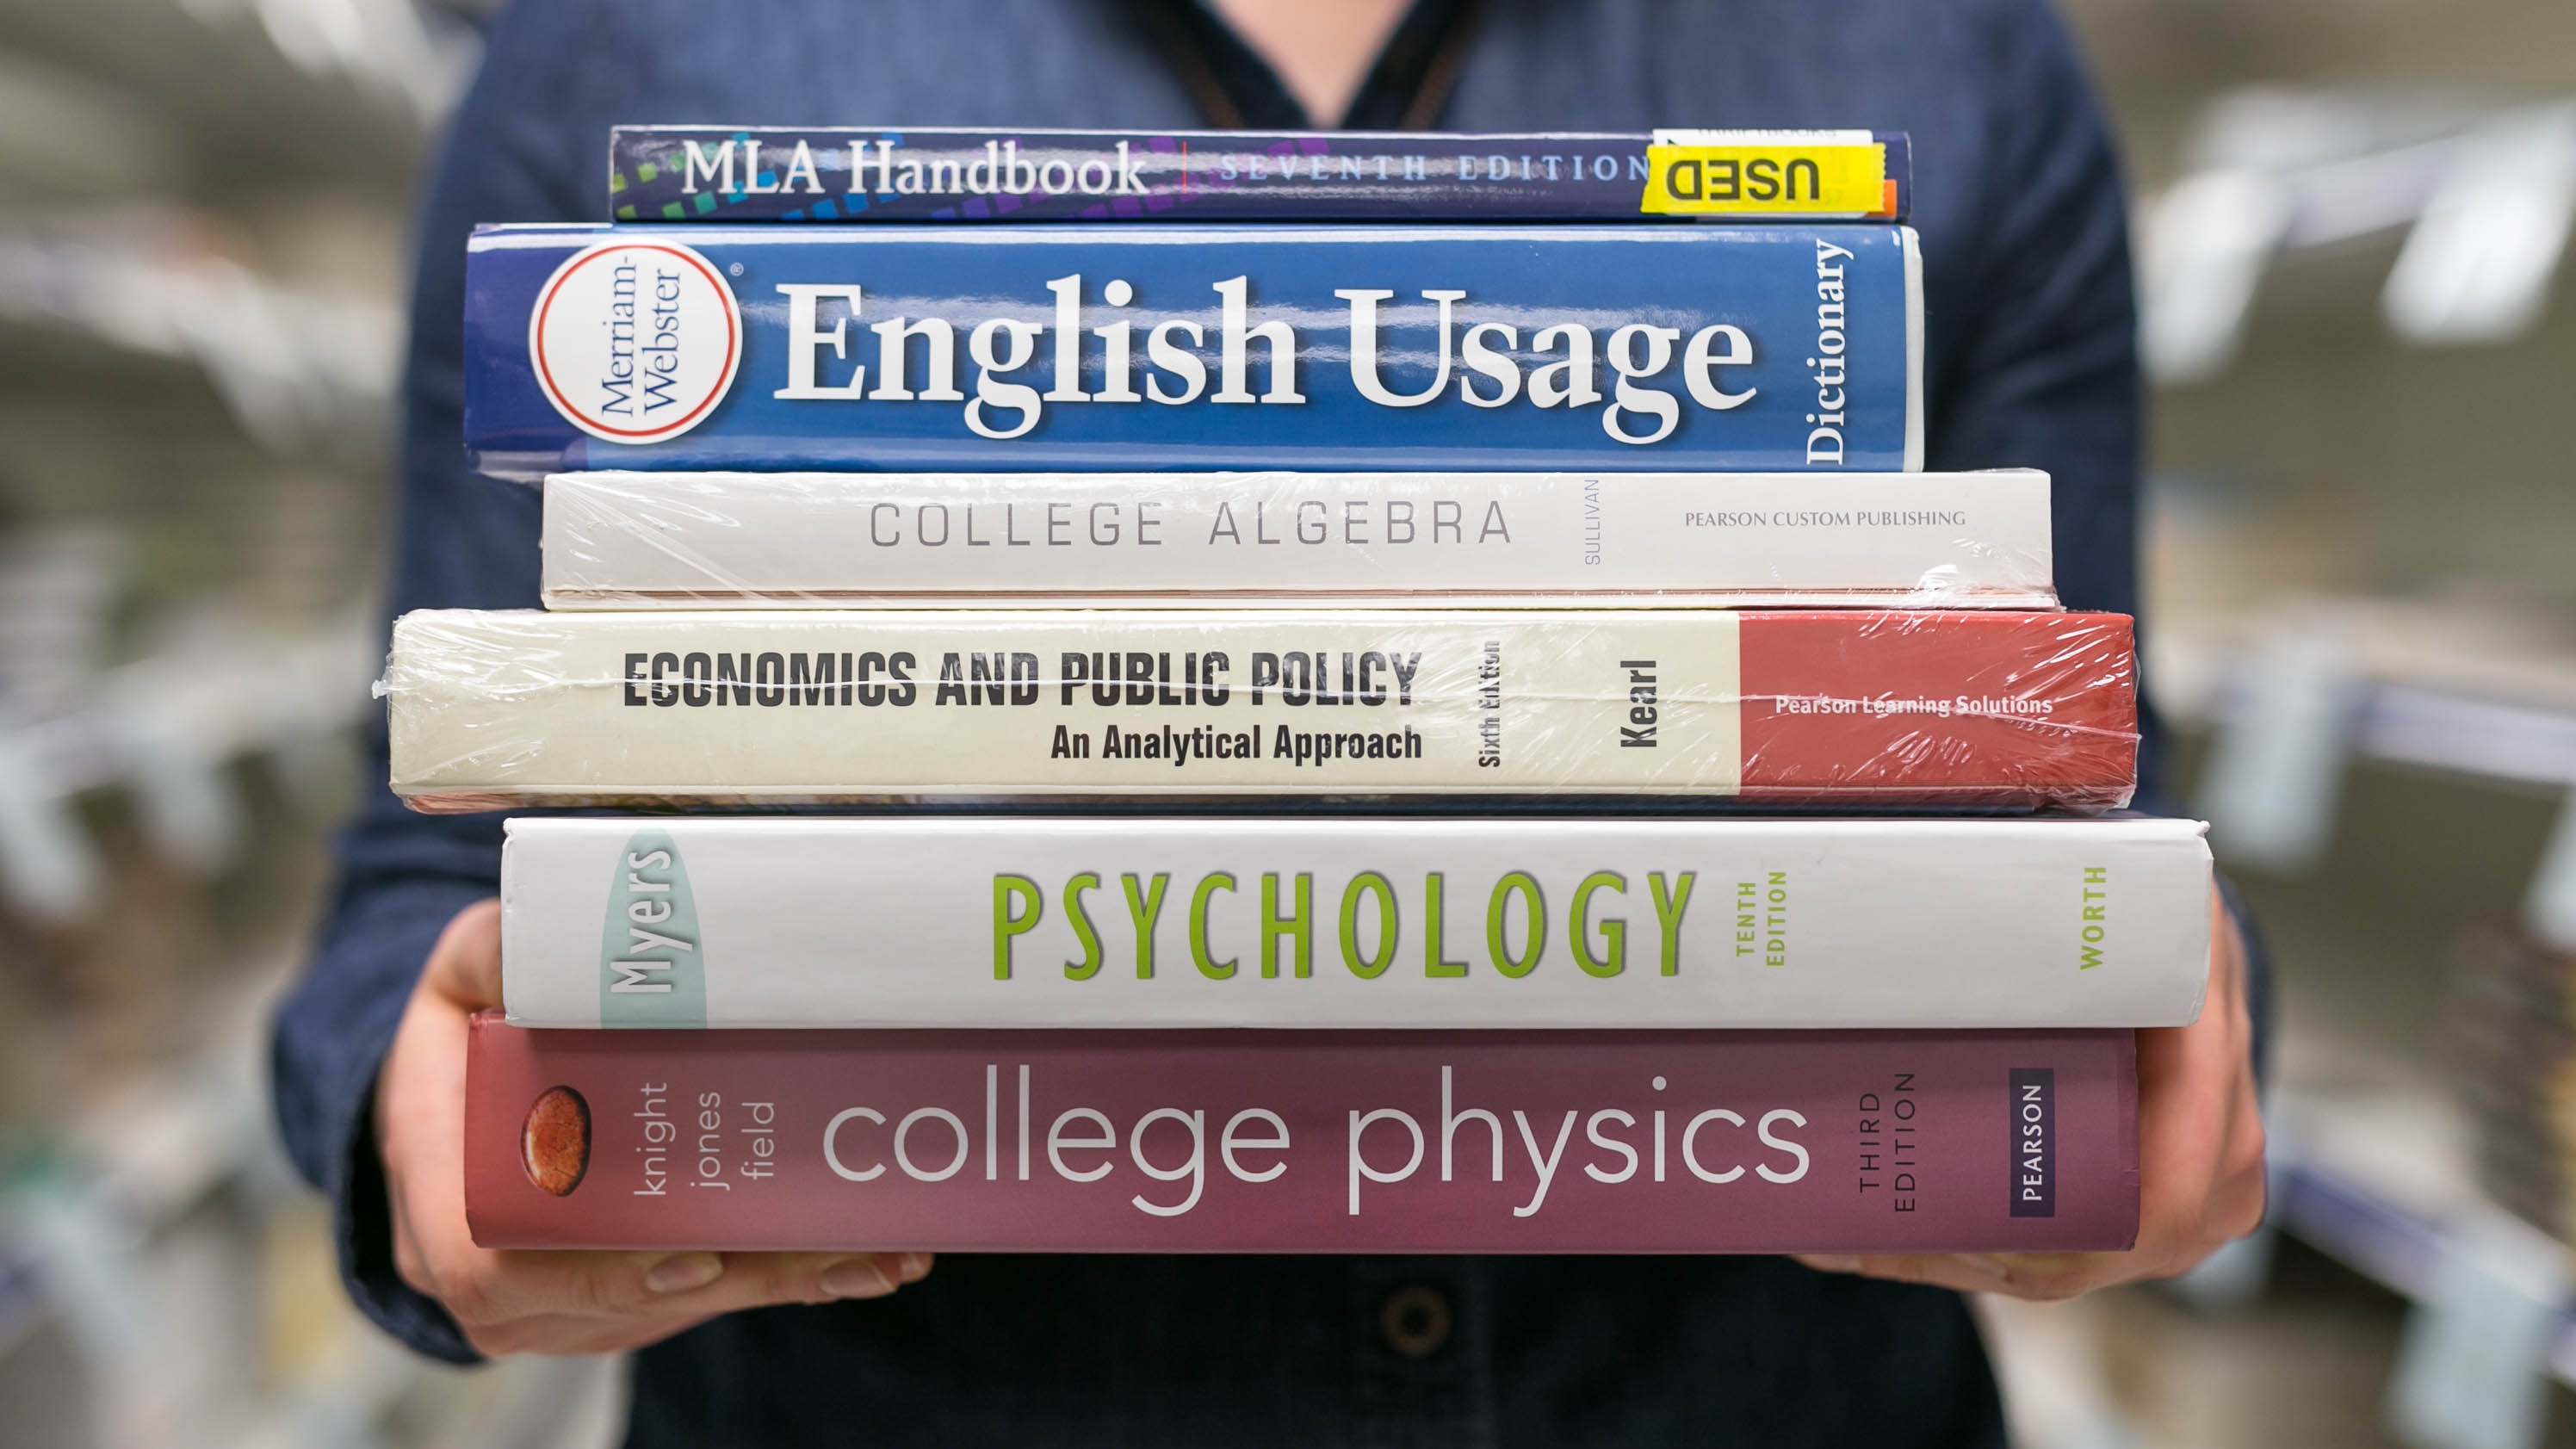 back-to-school deals at office depot, walgreens, walmart, and more – student holding a stack of textbooks